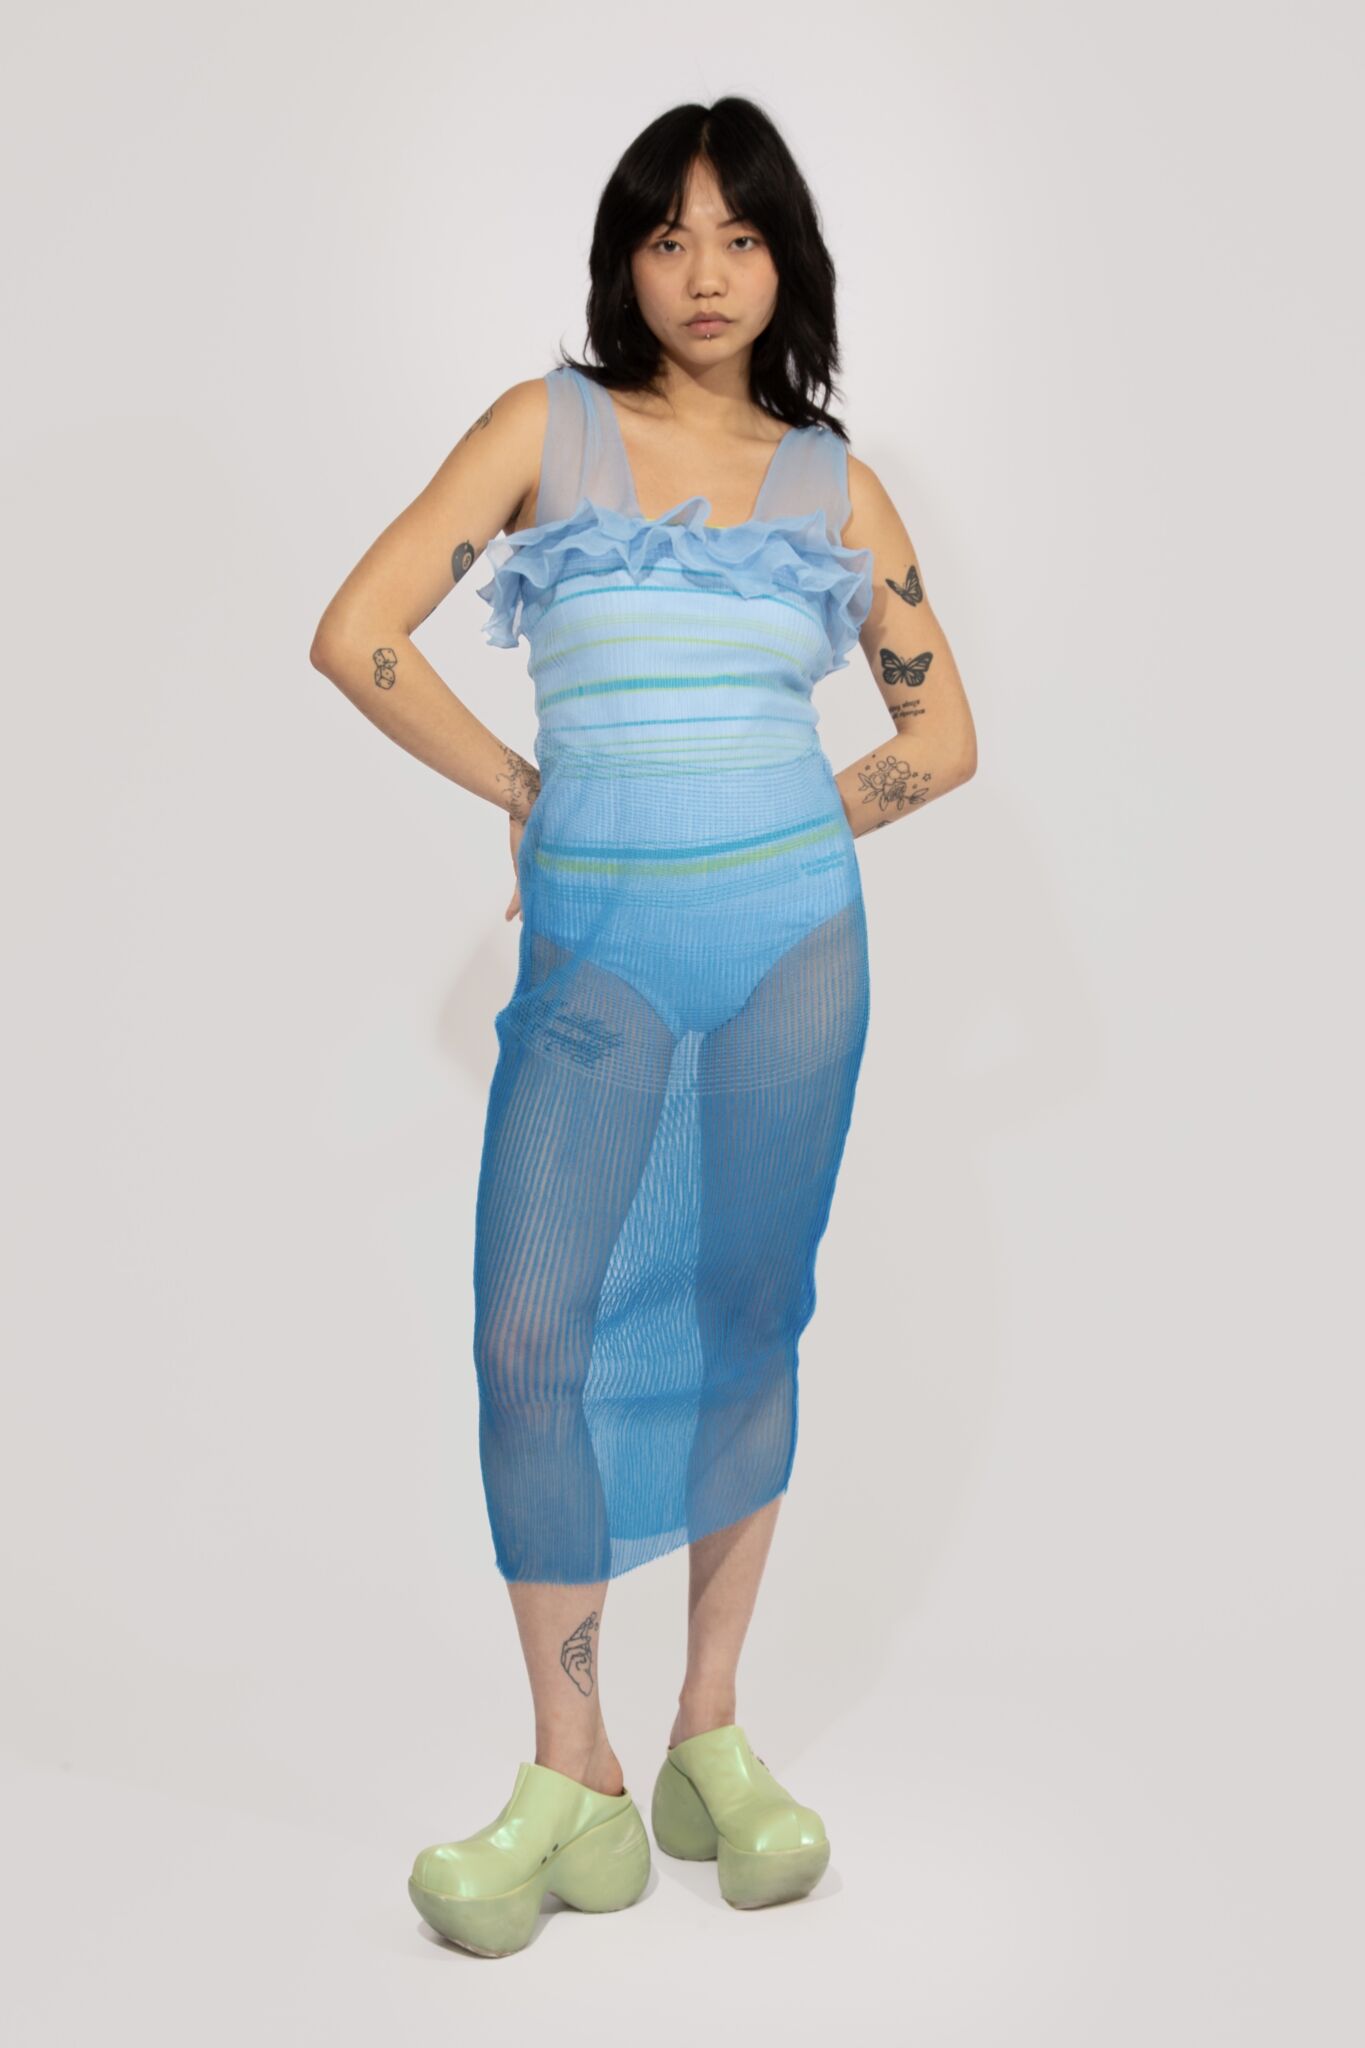 Secret Gradient knitted Dress in transparant gradient blue shades, with sporty stripe body